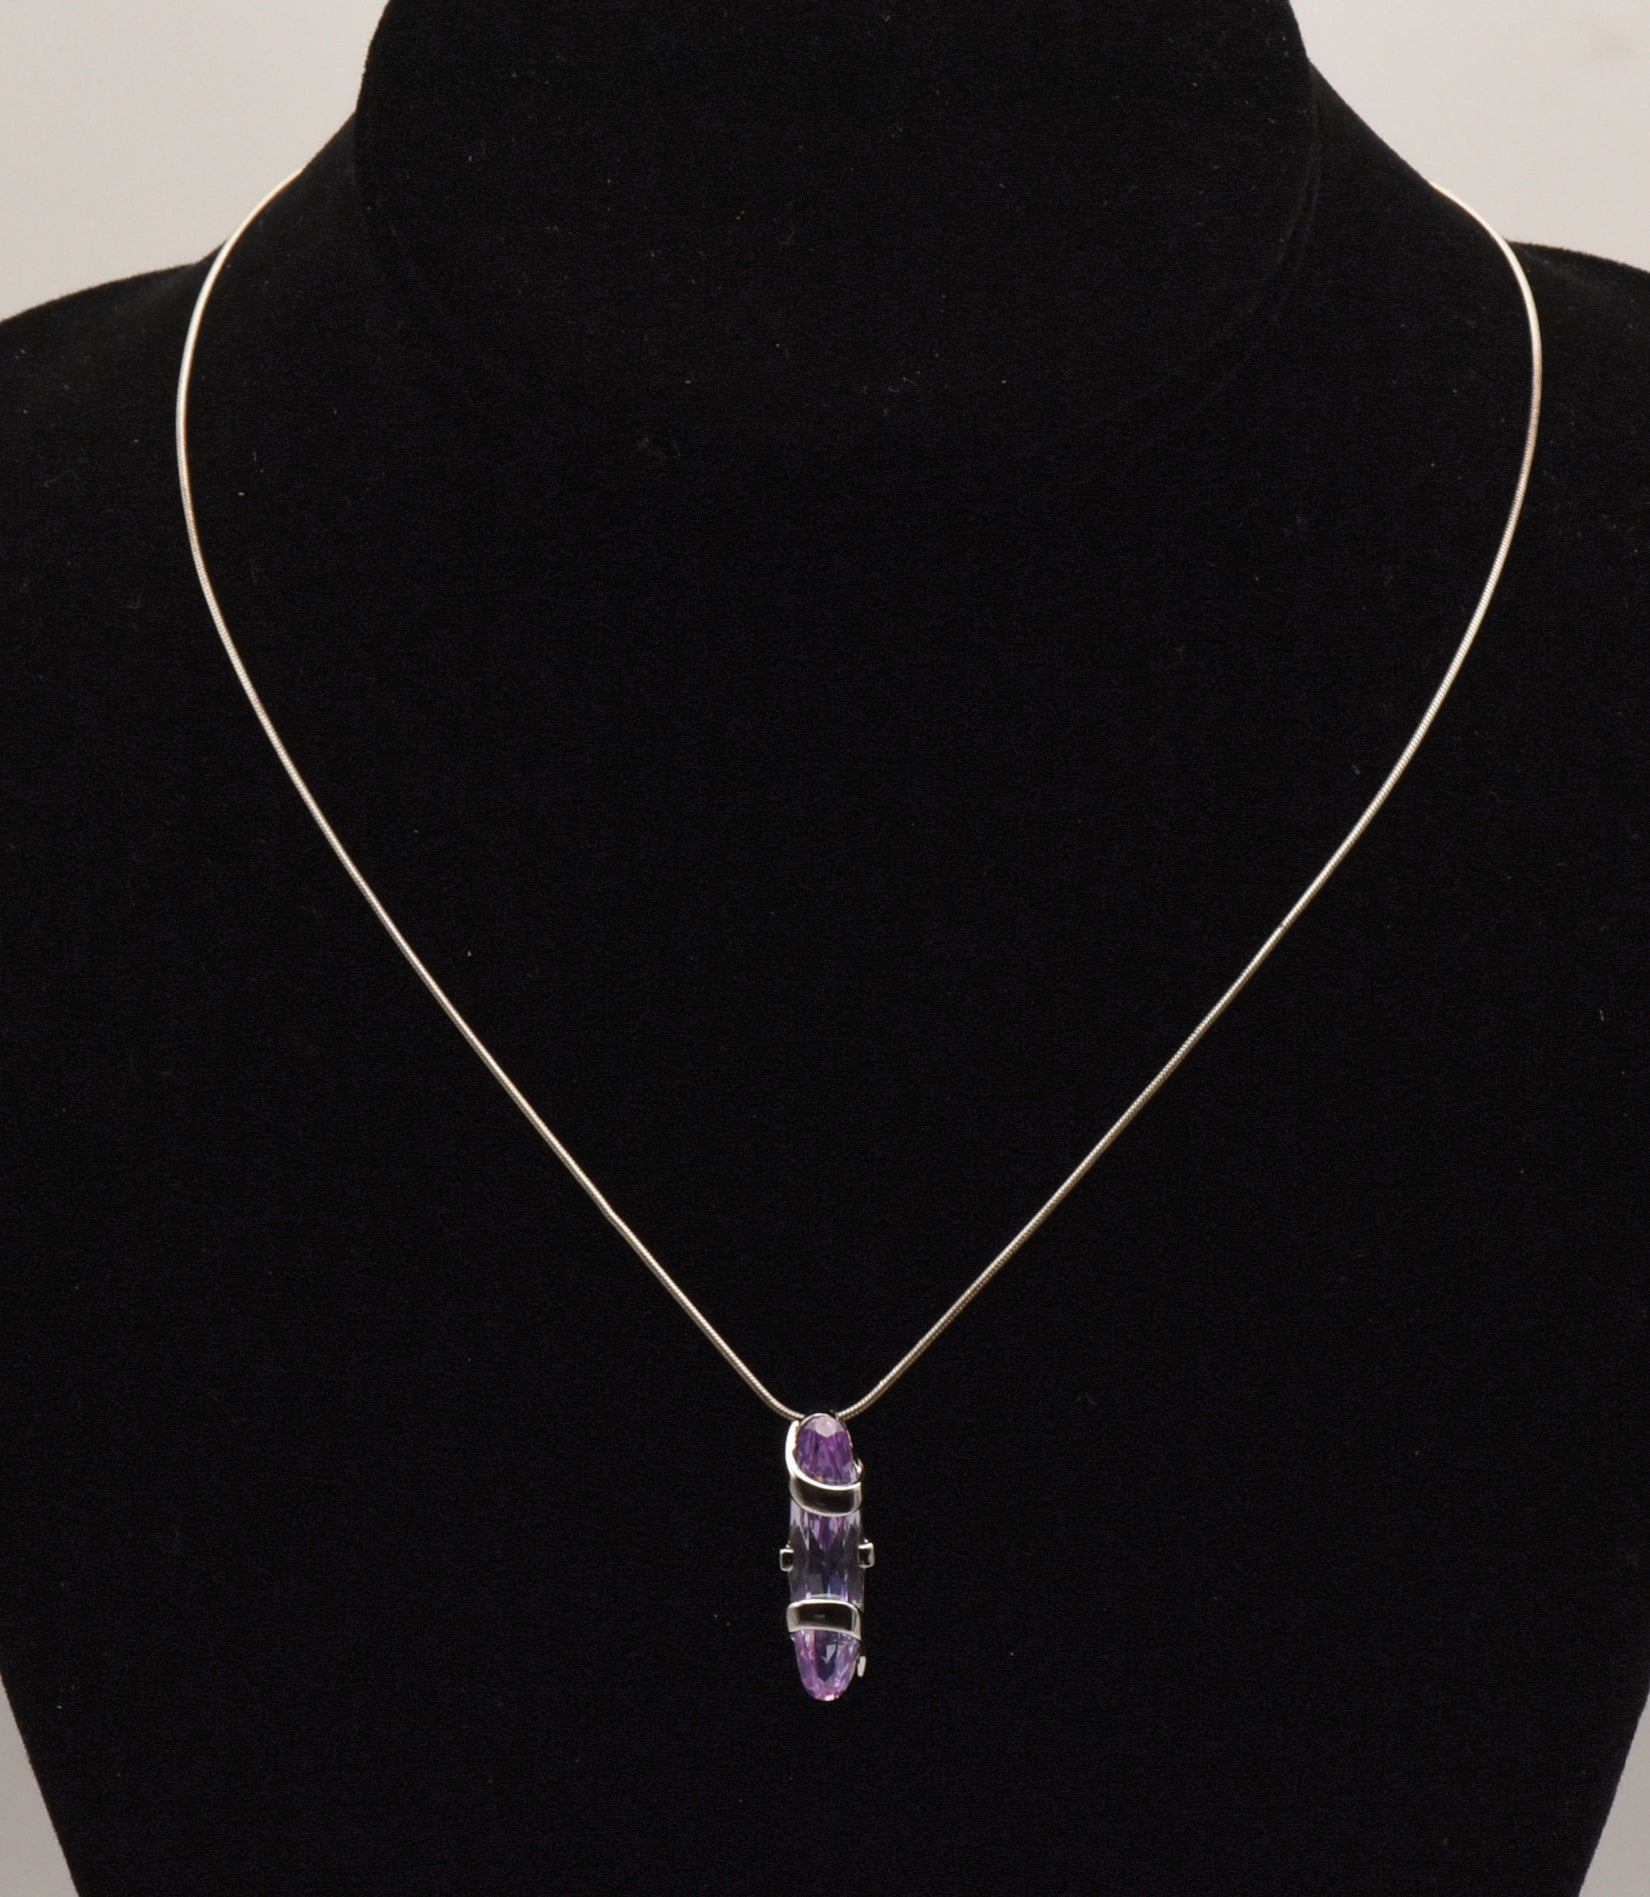 Bluish Purple Cut Glass Sterling Silver Pendant on Sterling Silver Italian Snake Link Chain Necklace - 16.5"